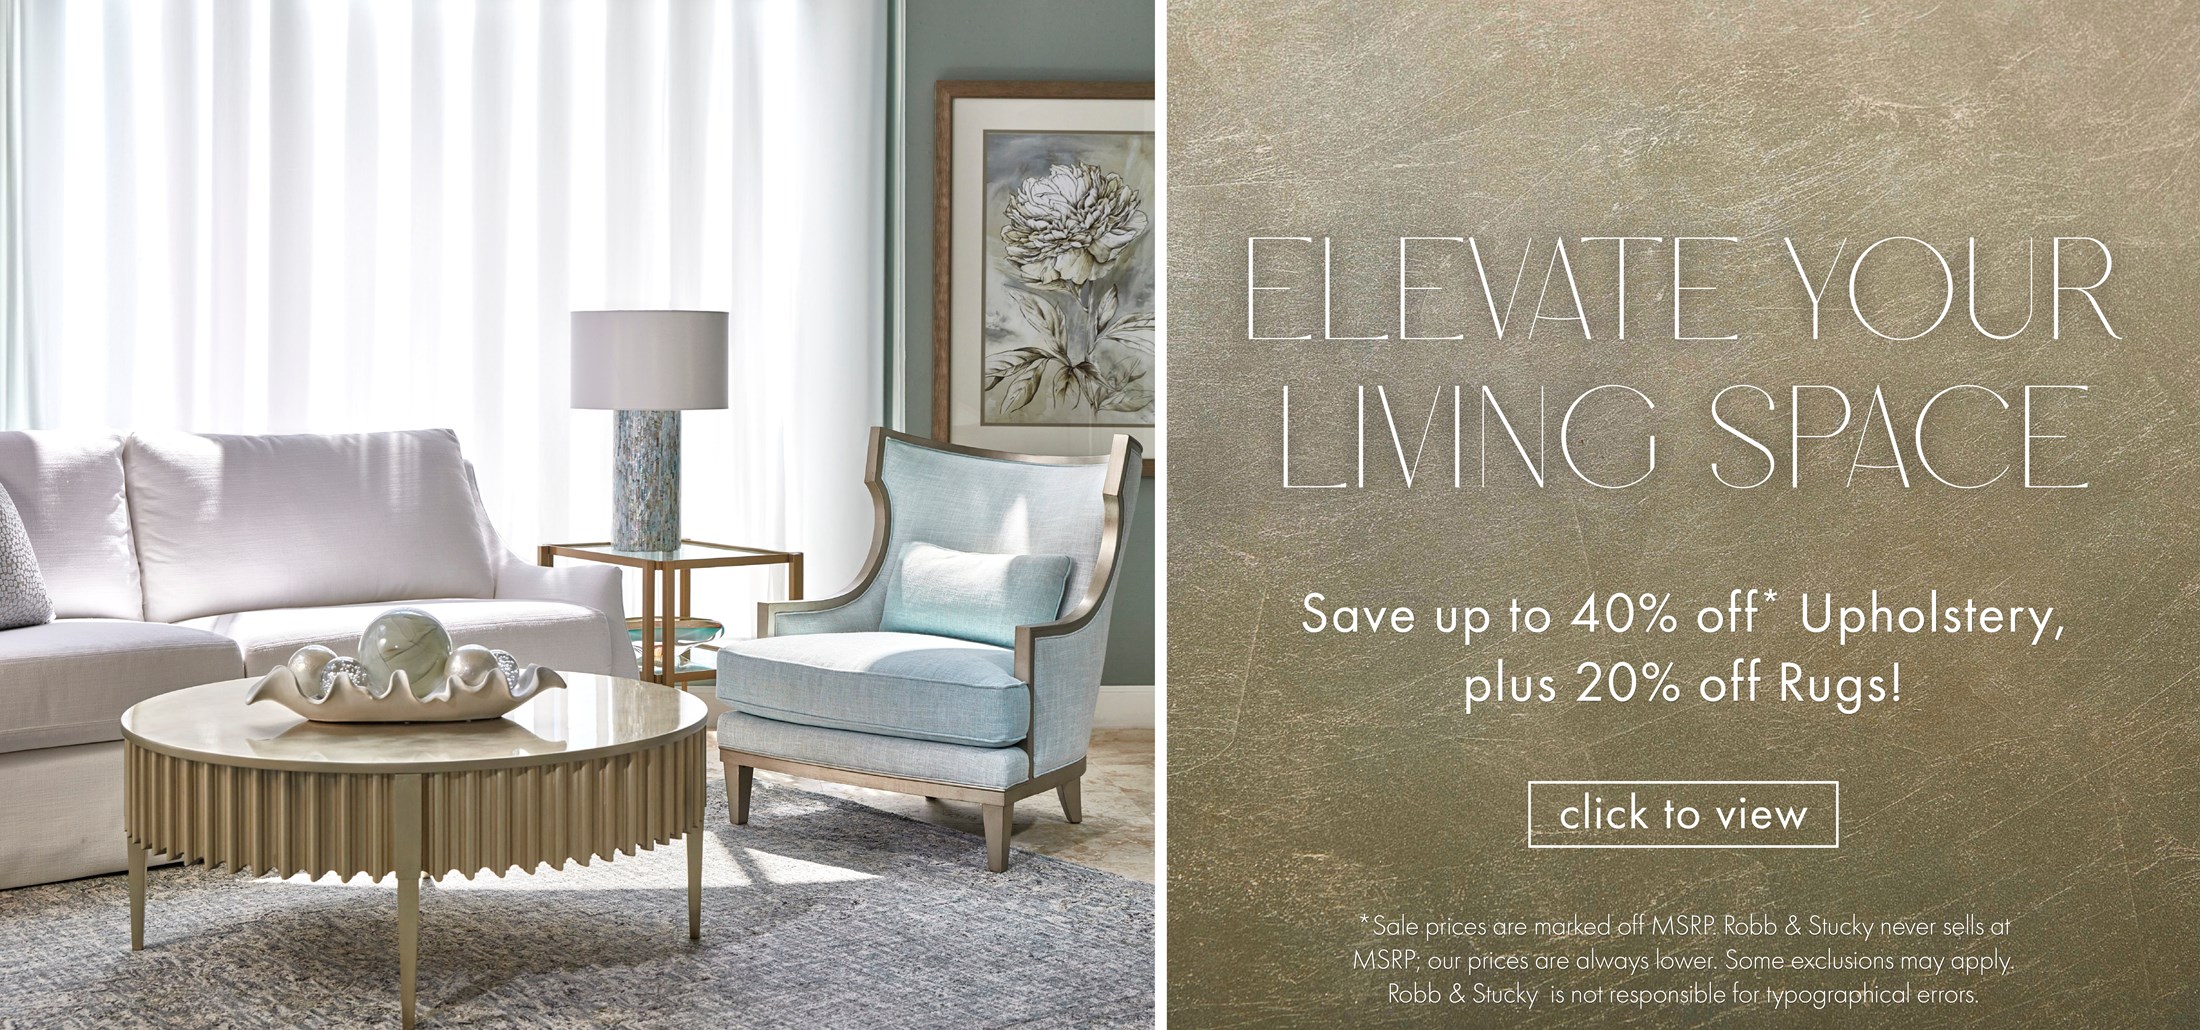 Image of a white sofa and gold leaf cocktail table. Text: Elevate Your Living Space. Save up to 40% off* upholstery, plus 20% off Rugs! Click to view. *Sale prices are marked off MSRP. Robb & Stucky never sells at MSRP; our prices are always lower.  Some exclusions may apply. Robb & Stucky is not responsible for typographical errors. Click to view. Links to Elevate Your Living Space Event.